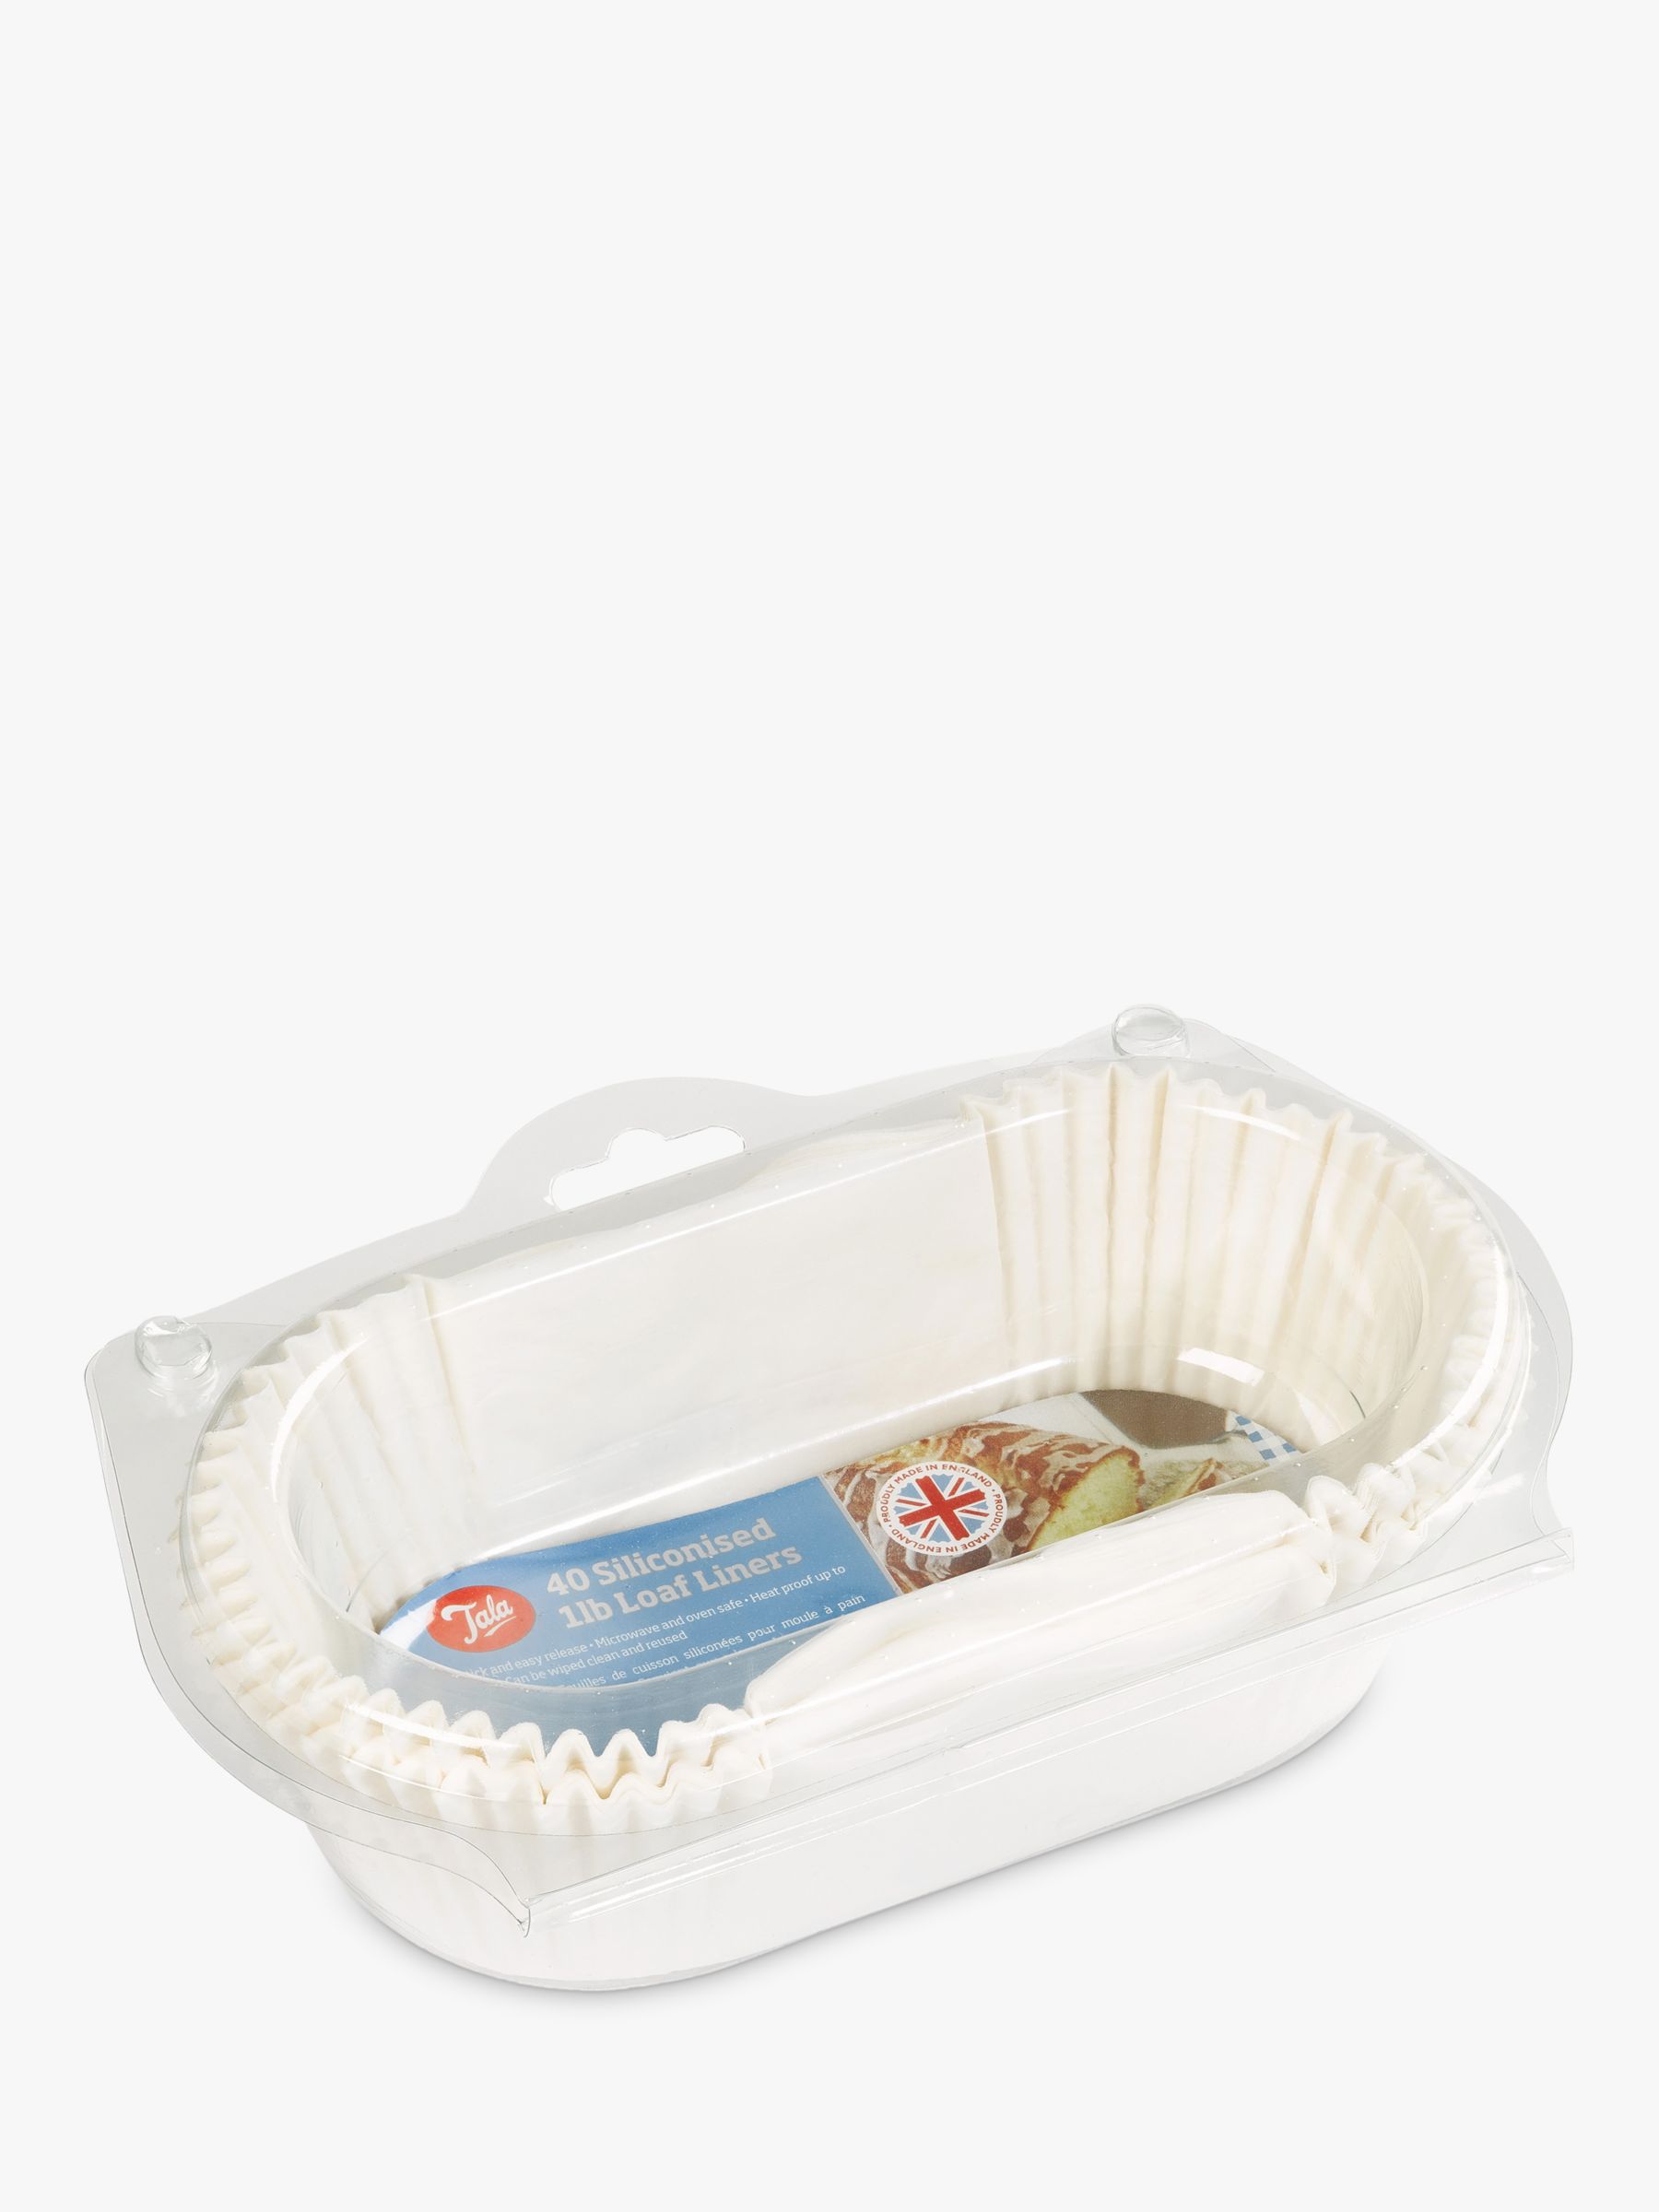 Tala Non-Stick Greaseproof Siliconised 1lb Loaf Tin Liners, Pack of 40, White